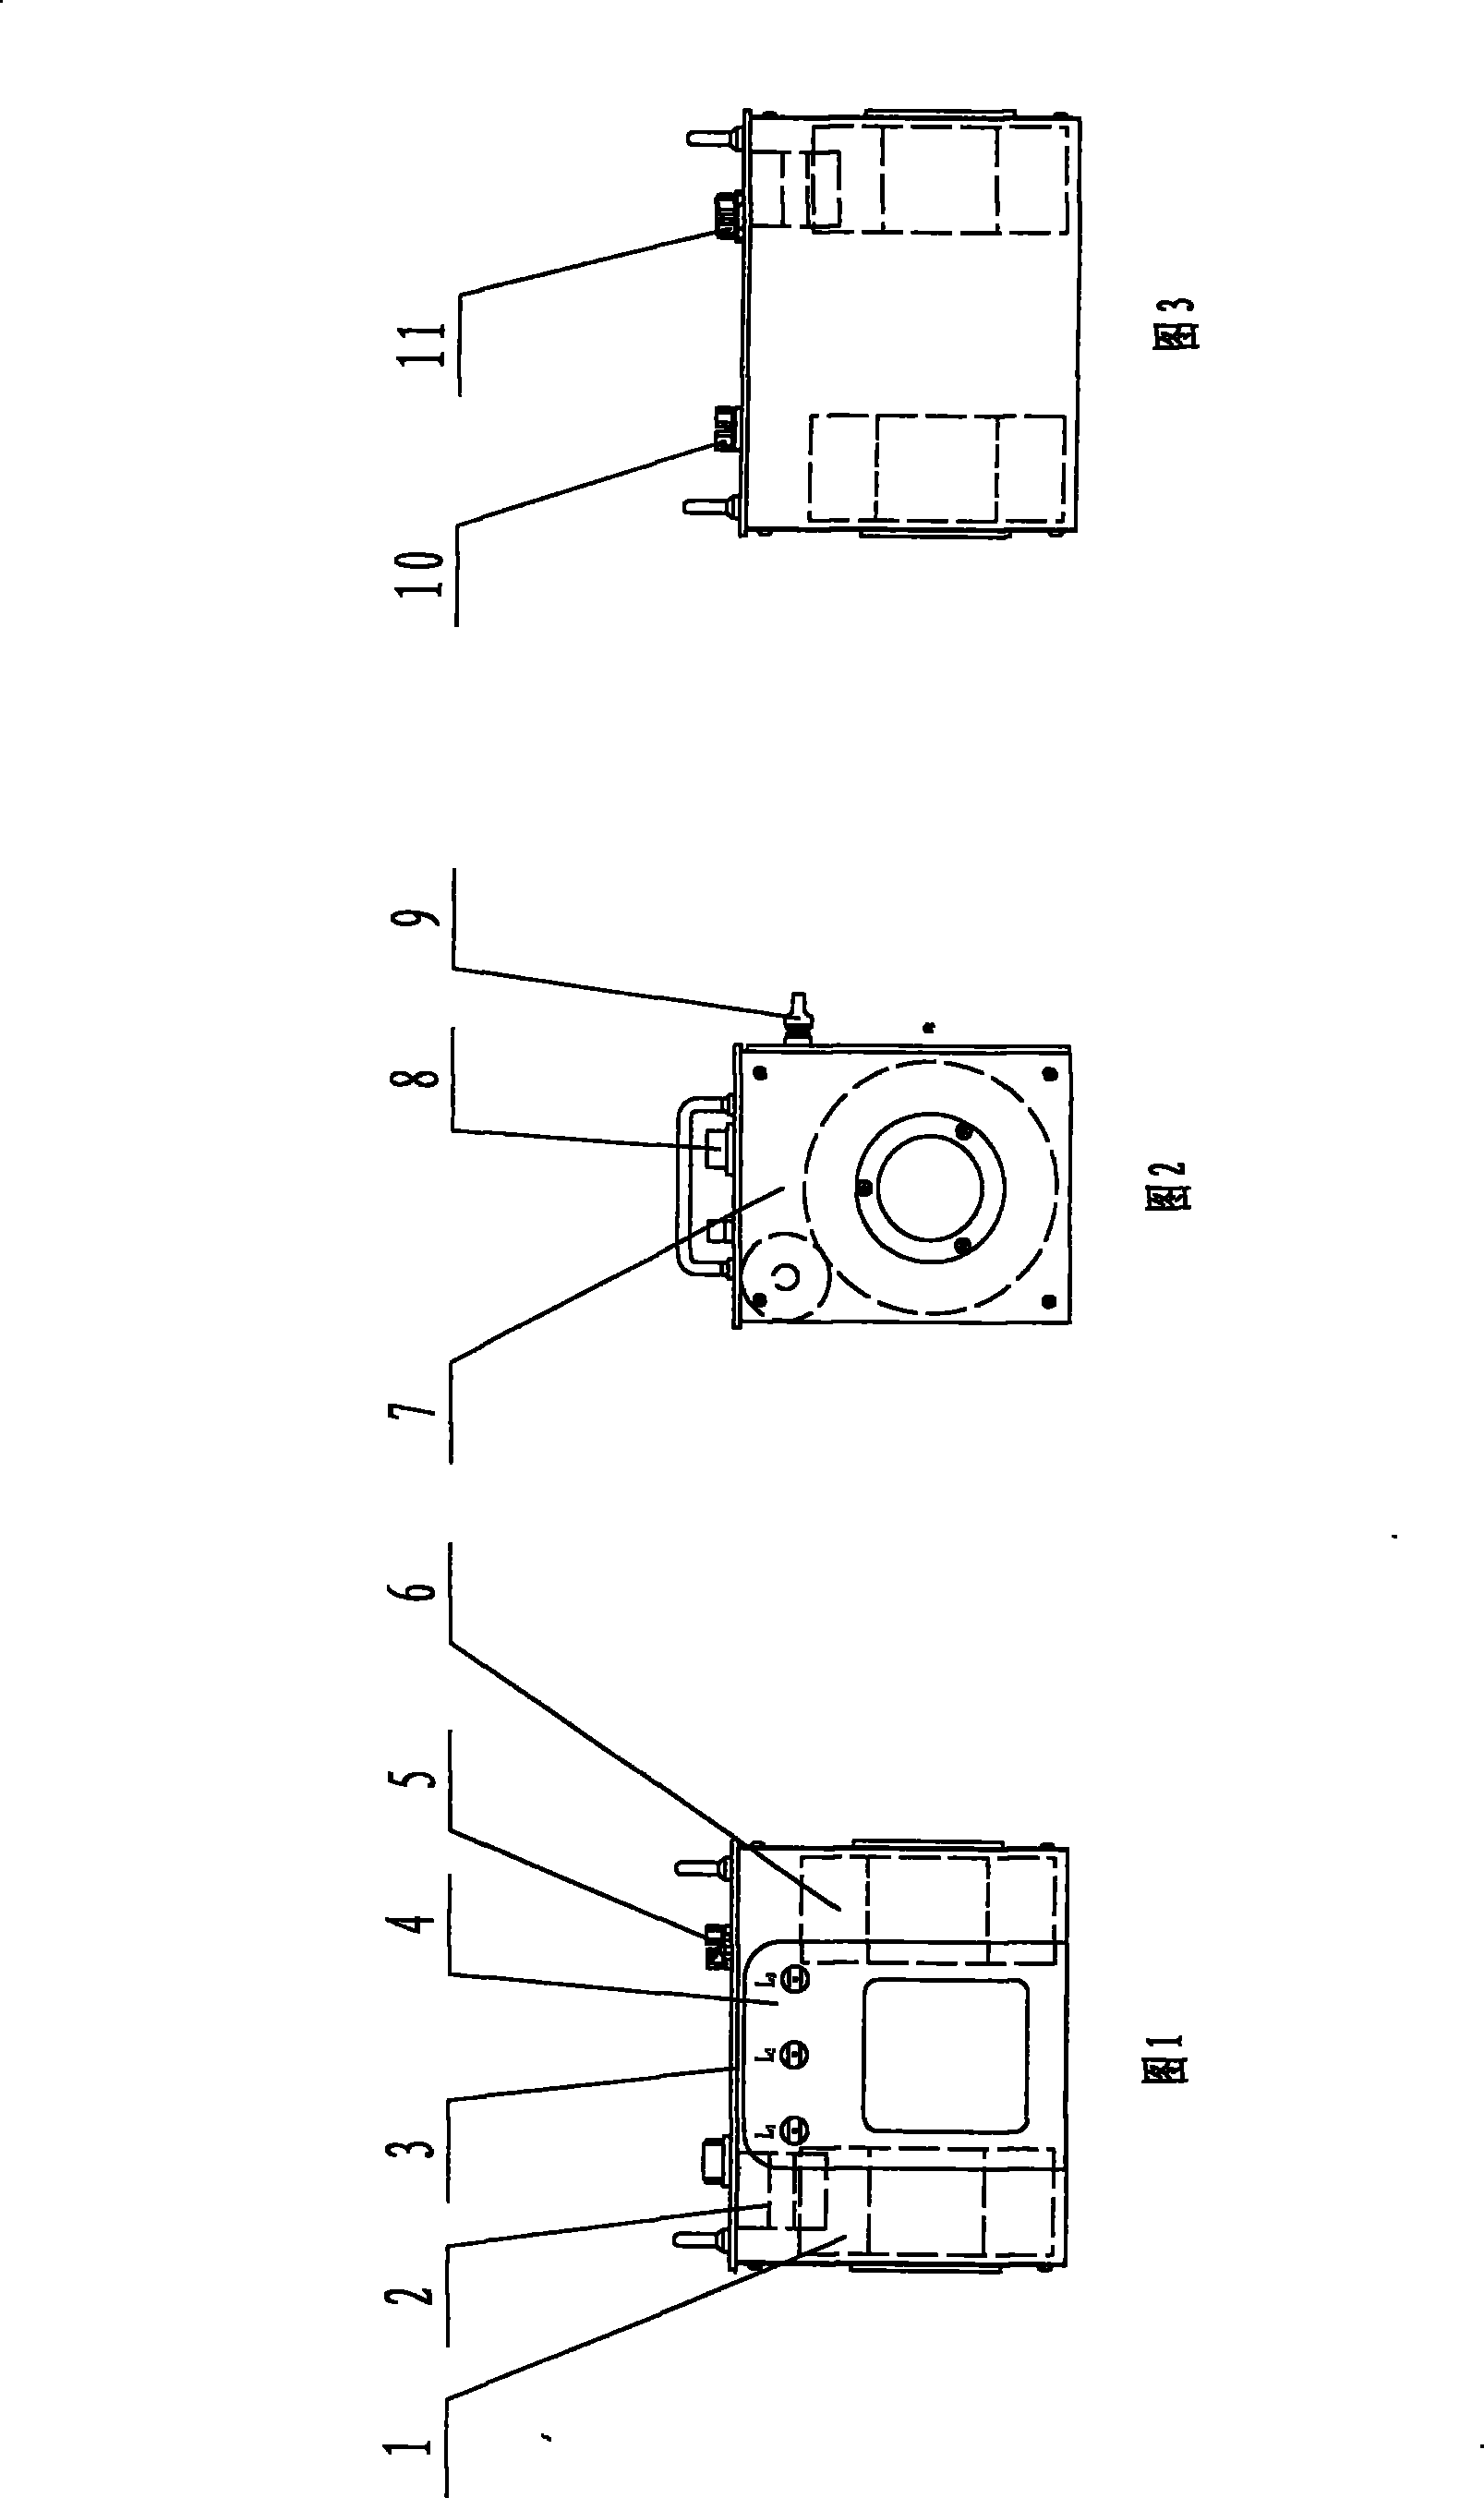 Standard current transformer integration apparatus for on-site detection